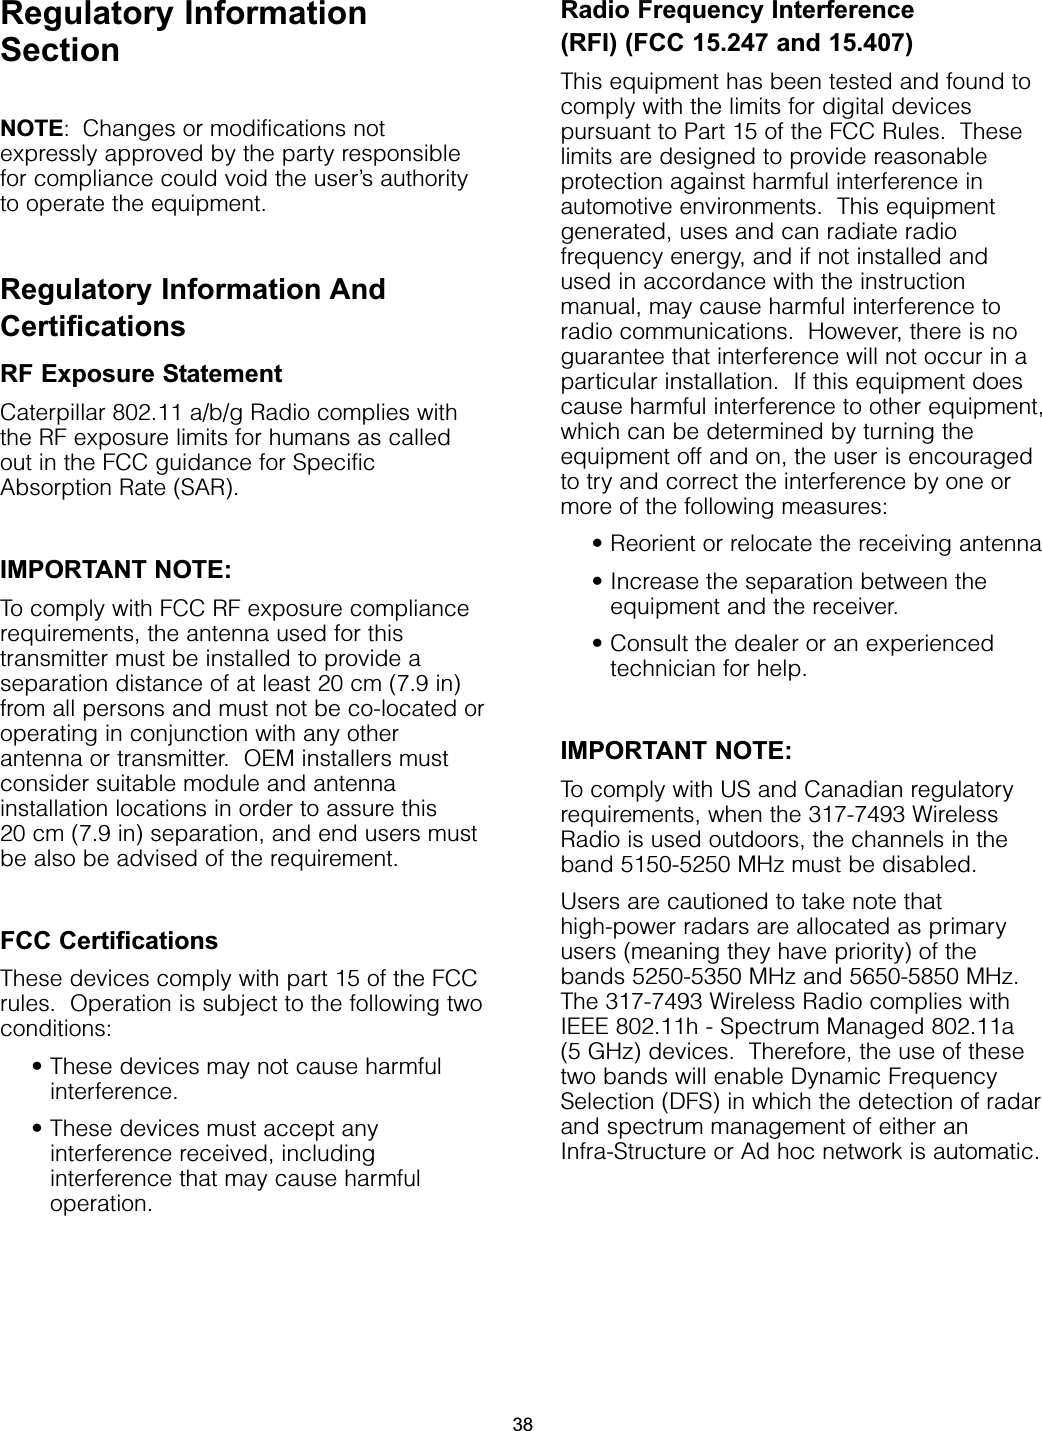 Regulatory InformationSectionNOTE: Changes or modifications notexpressly approved by the party responsiblefor compliance could void the user’s authorityto operate the equipment.Regulatory Information AndCertificationsRF Exposure StatementCaterpillar 802.11 a/b/g Radio complies withthe RF exposure limits for humans as calledout in the FCC guidance for SpecificAbsorption Rate (SAR).  IMPORTANT NOTE:To comply with FCC RF exposure compliancerequirements, the antenna used for thistransmitter must be installed to provide aseparation distance of at least 20 cm (7.9 in)from all persons and must not be co-located oroperating in conjunction with any otherantenna or transmitter.  OEM installers mustconsider suitable module and antennainstallation locations in order to assure this 20 cm (7.9 in) separation, and end users mustbe also be advised of the requirement.FCC CertificationsThese devices comply with part 15 of the FCCrules.  Operation is subject to the following twoconditions: • These devices may not cause harmfulinterference.• These devices must accept anyinterference received, includinginterference that may cause harmfuloperation.Radio Frequency Interference (RFI) (FCC 15.247 and 15.407)This equipment has been tested and found tocomply with the limits for digital devicespursuant to Part 15 of the FCC Rules.  Theselimits are designed to provide reasonableprotection against harmful interference inautomotive environments.  This equipmentgenerated, uses and can radiate radiofrequency energy, and if not installed andused in accordance with the instructionmanual, may cause harmful interference toradio communications.  However, there is noguarantee that interference will not occur in aparticular installation.  If this equipment doescause harmful interference to other equipment,which can be determined by turning theequipment off and on, the user is encouragedto try and correct the interference by one ormore of the following measures:• Reorient or relocate the receiving antenna• Increase the separation between theequipment and the receiver.• Consult the dealer or an experiencedtechnician for help.IMPORTANT NOTE:To comply with US and Canadian regulatoryrequirements, when the 317-7493 WirelessRadio is used outdoors, the channels in theband 5150-5250 MHz must be disabled.Users are cautioned to take note thathigh-power radars are allocated as primaryusers (meaning they have priority) of thebands 5250-5350 MHz and 5650-5850 MHz.The 317-7493 Wireless Radio complies with IEEE 802.11h - Spectrum Managed 802.11a (5 GHz) devices.  Therefore, the use of thesetwo bands will enable Dynamic FrequencySelection (DFS) in which the detection of radarand spectrum management of either anInfra-Structure or Ad hoc network is automatic.38